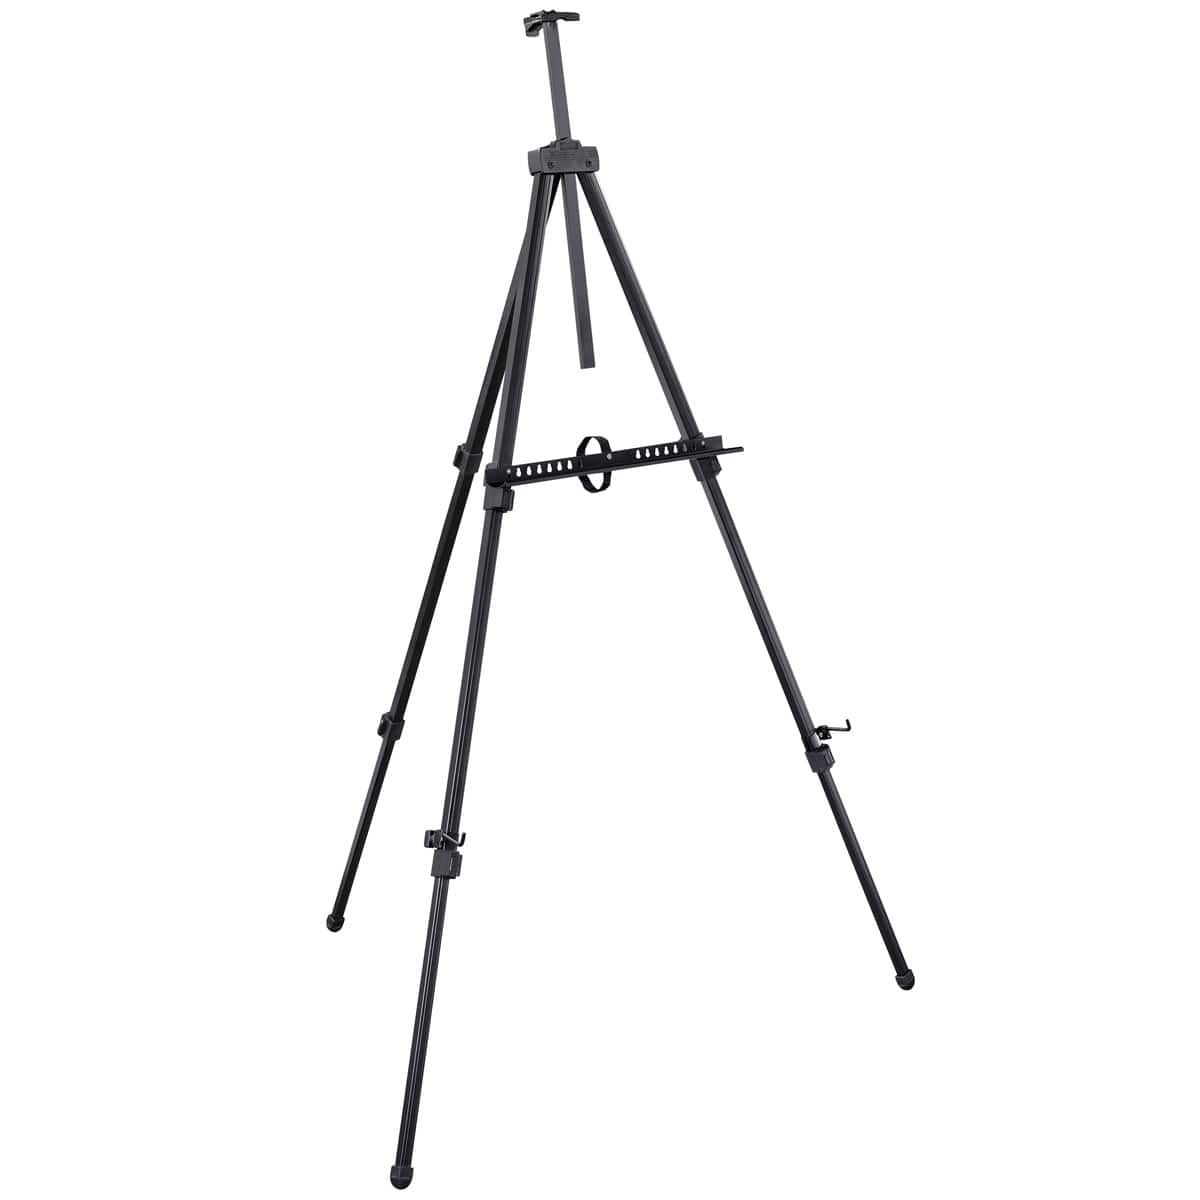 Lot - EASTLAKE CHERRY PICTURE EASEL TOGETHER WITH A BLACK METAL